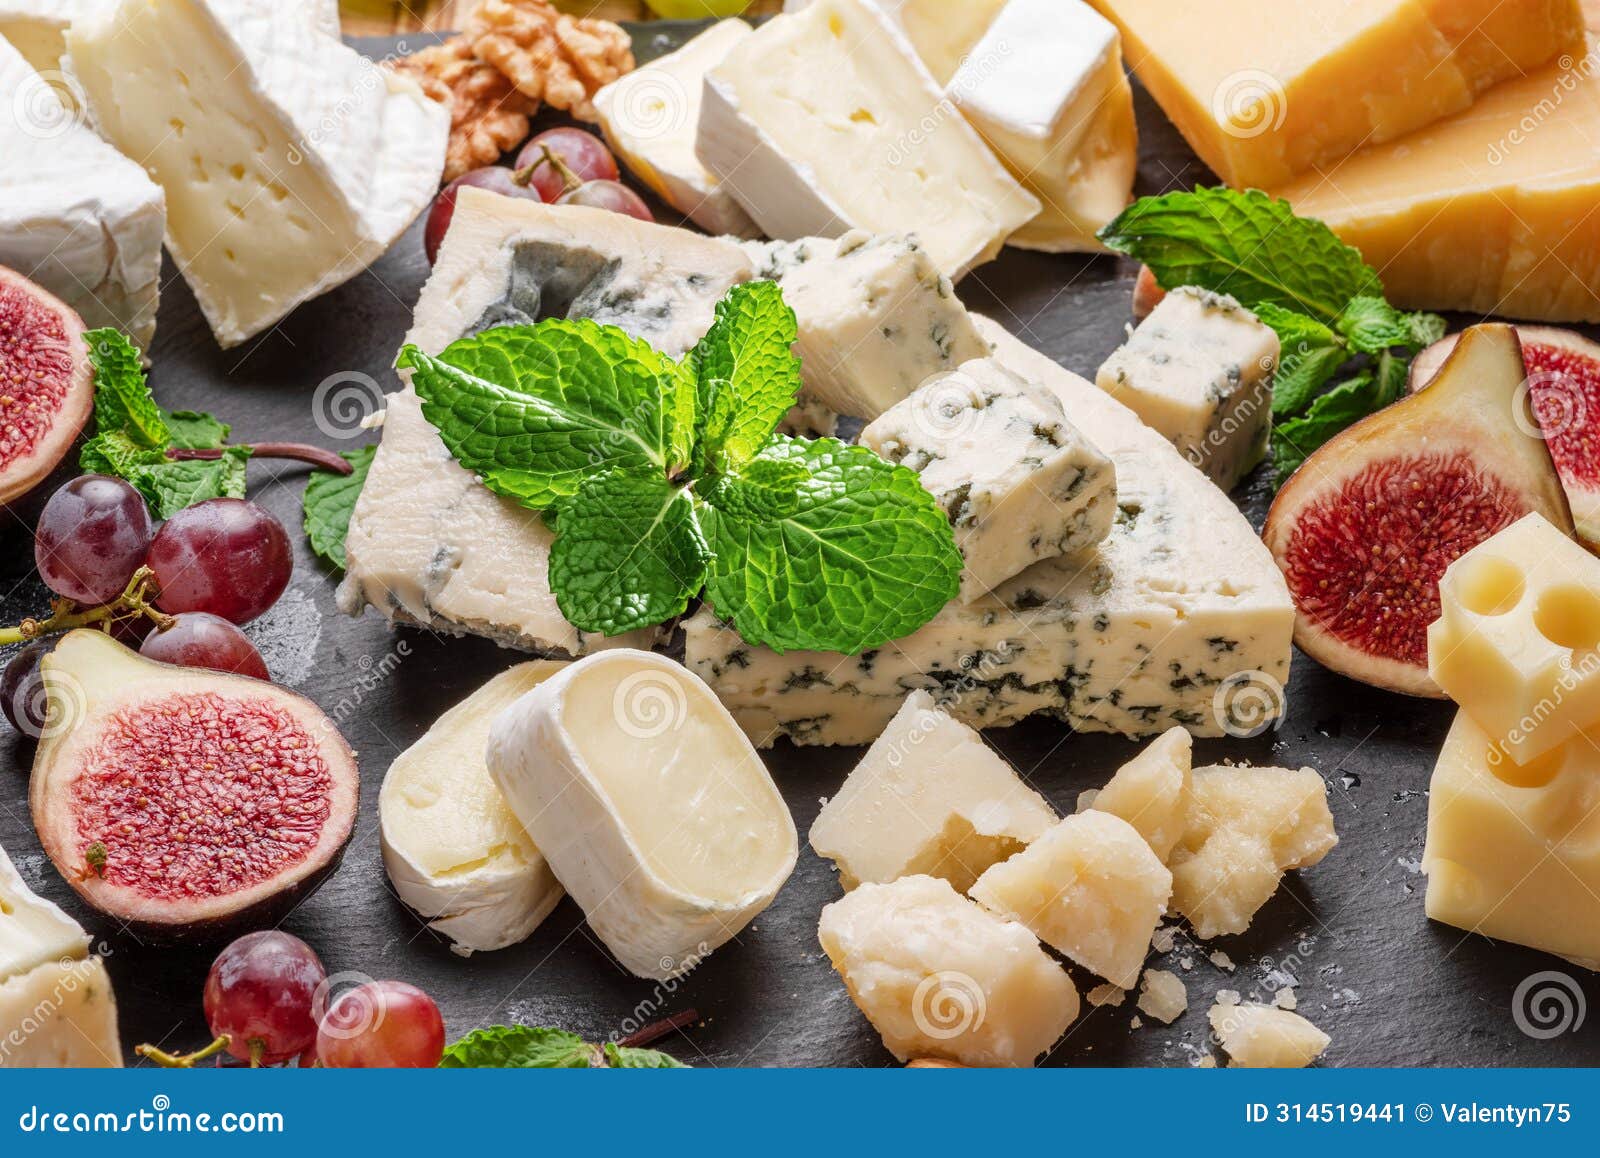 variety of sliced cheeses with fruits, mint, nuts and cheese cutting knives.